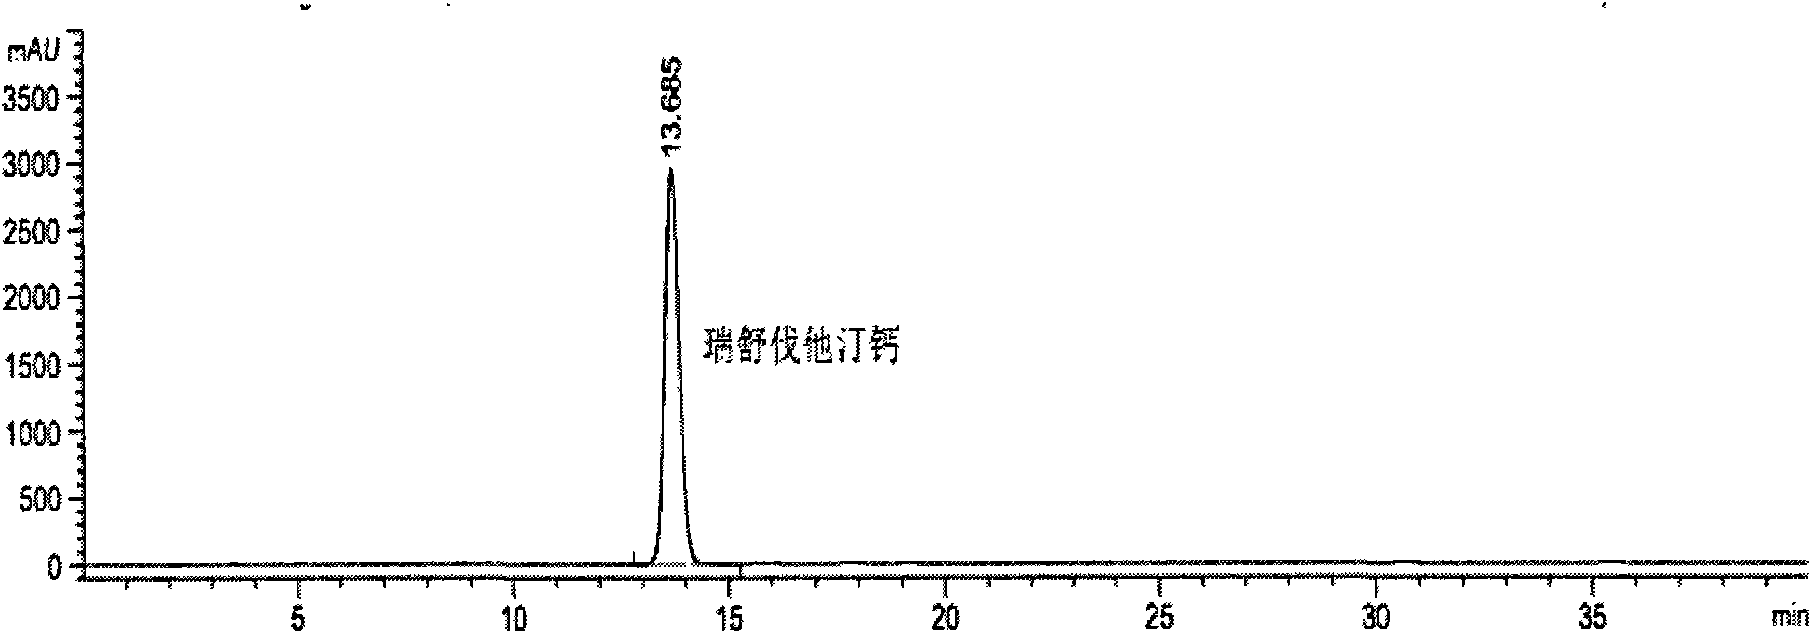 Method for determining content of rosuvastatin calcium and related substances thereof by employing HPLC (high performance liquid chromatography) method